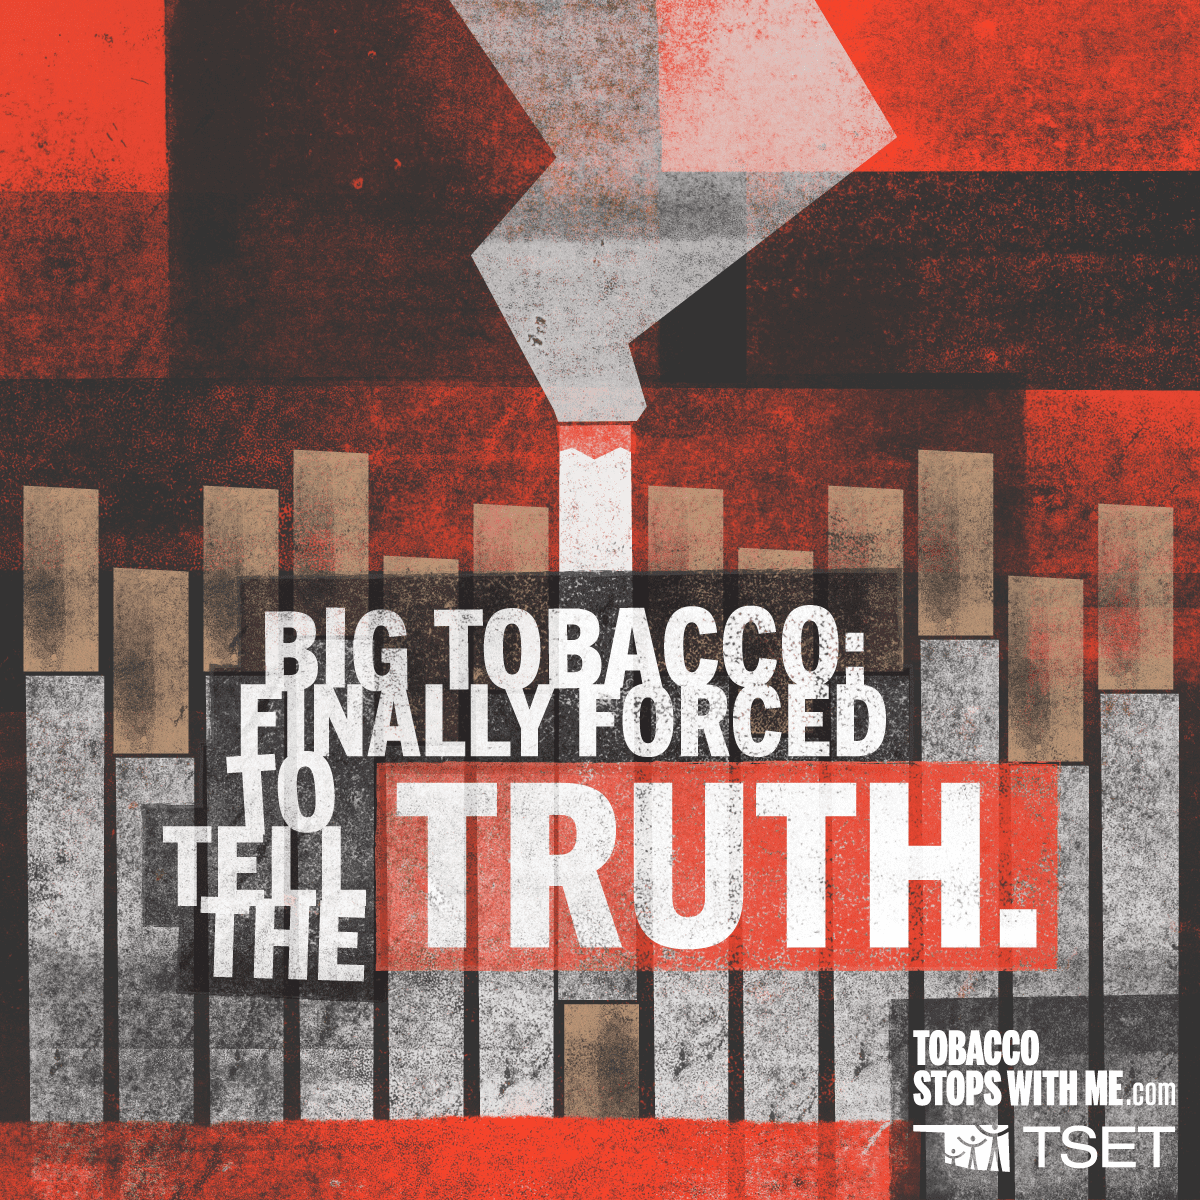 Big tobacco finally forced to tell the truth